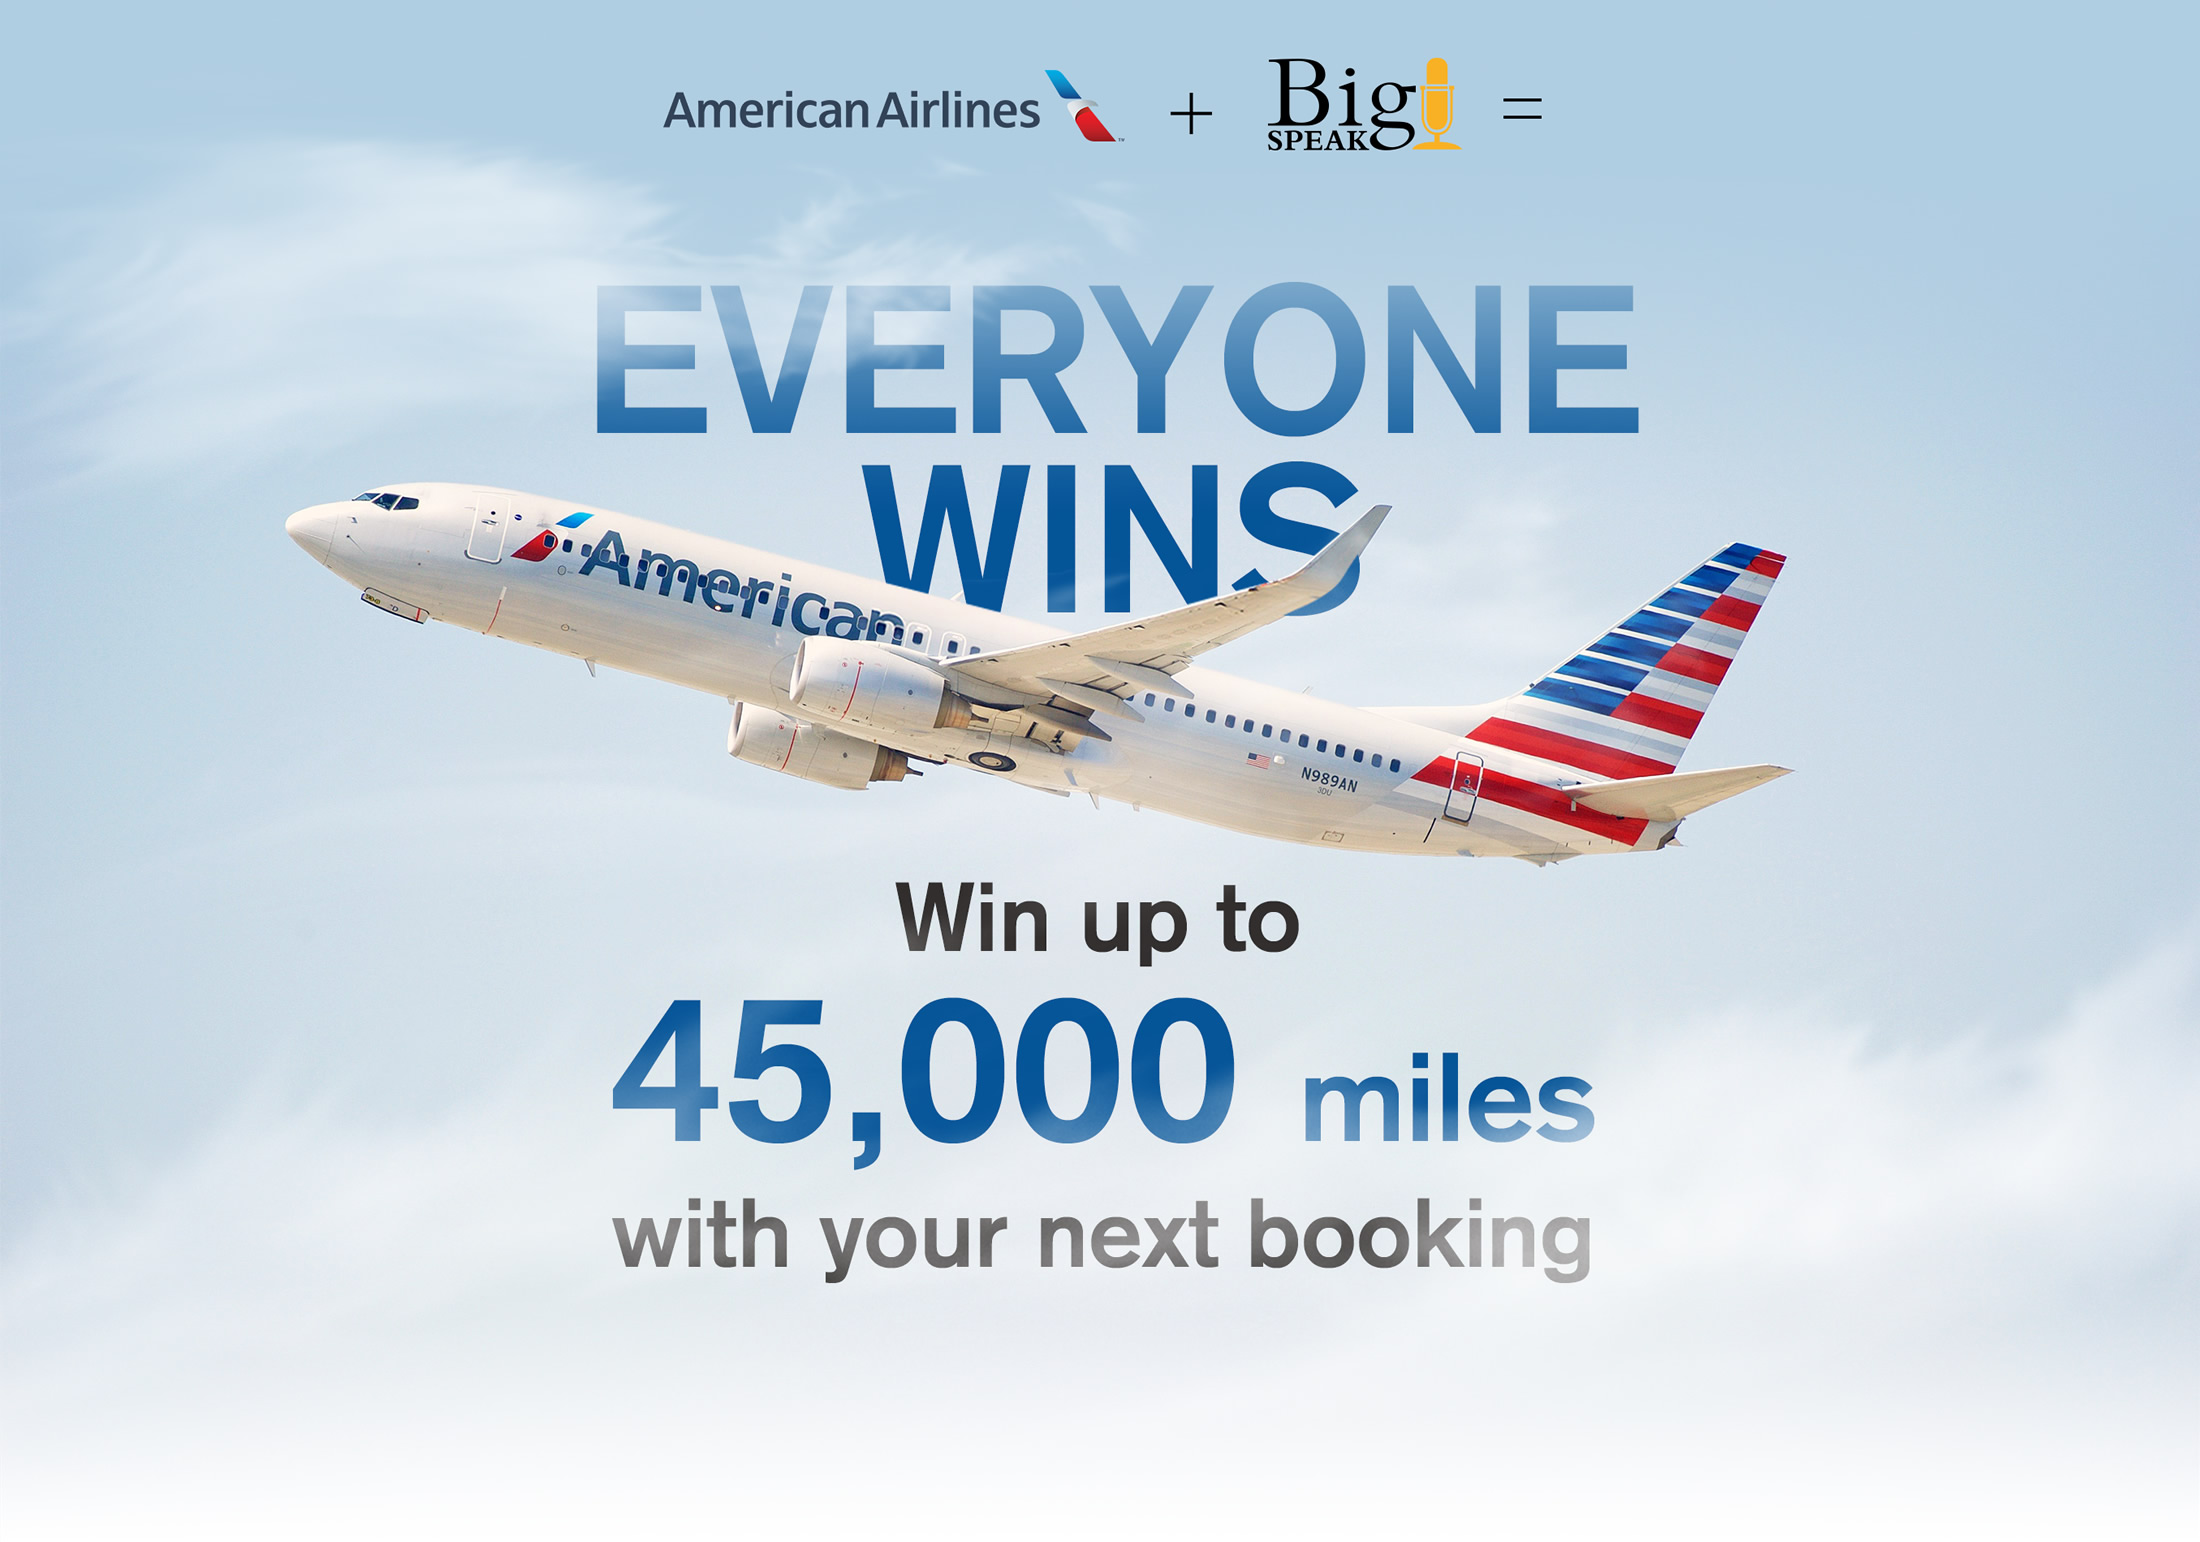 American Airlines Speaker Promotion